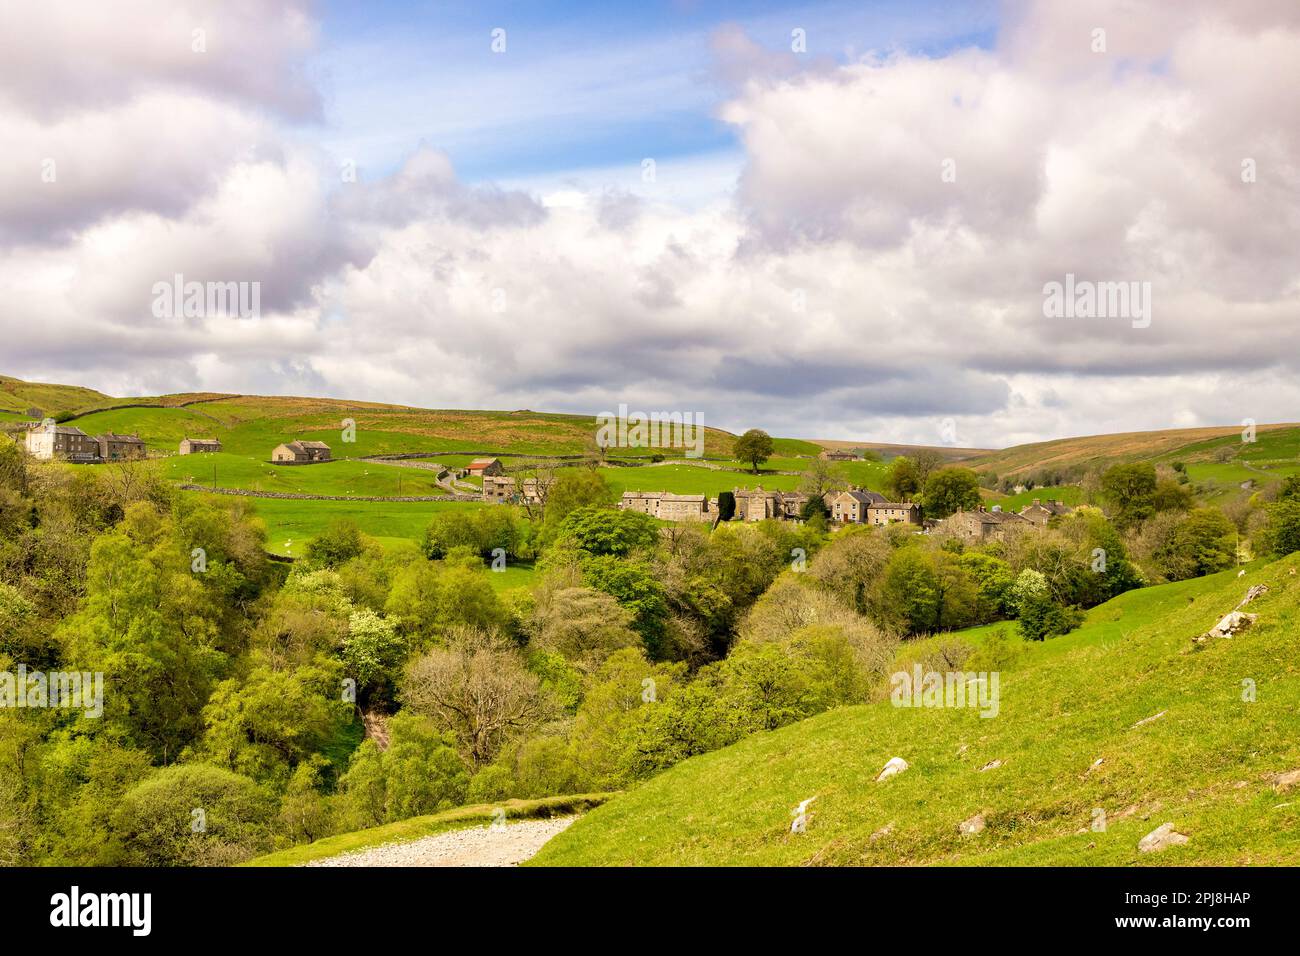 The village of Keld, Swaledale, in the Yorkshire Dales National Park, in spring. Stock Photo